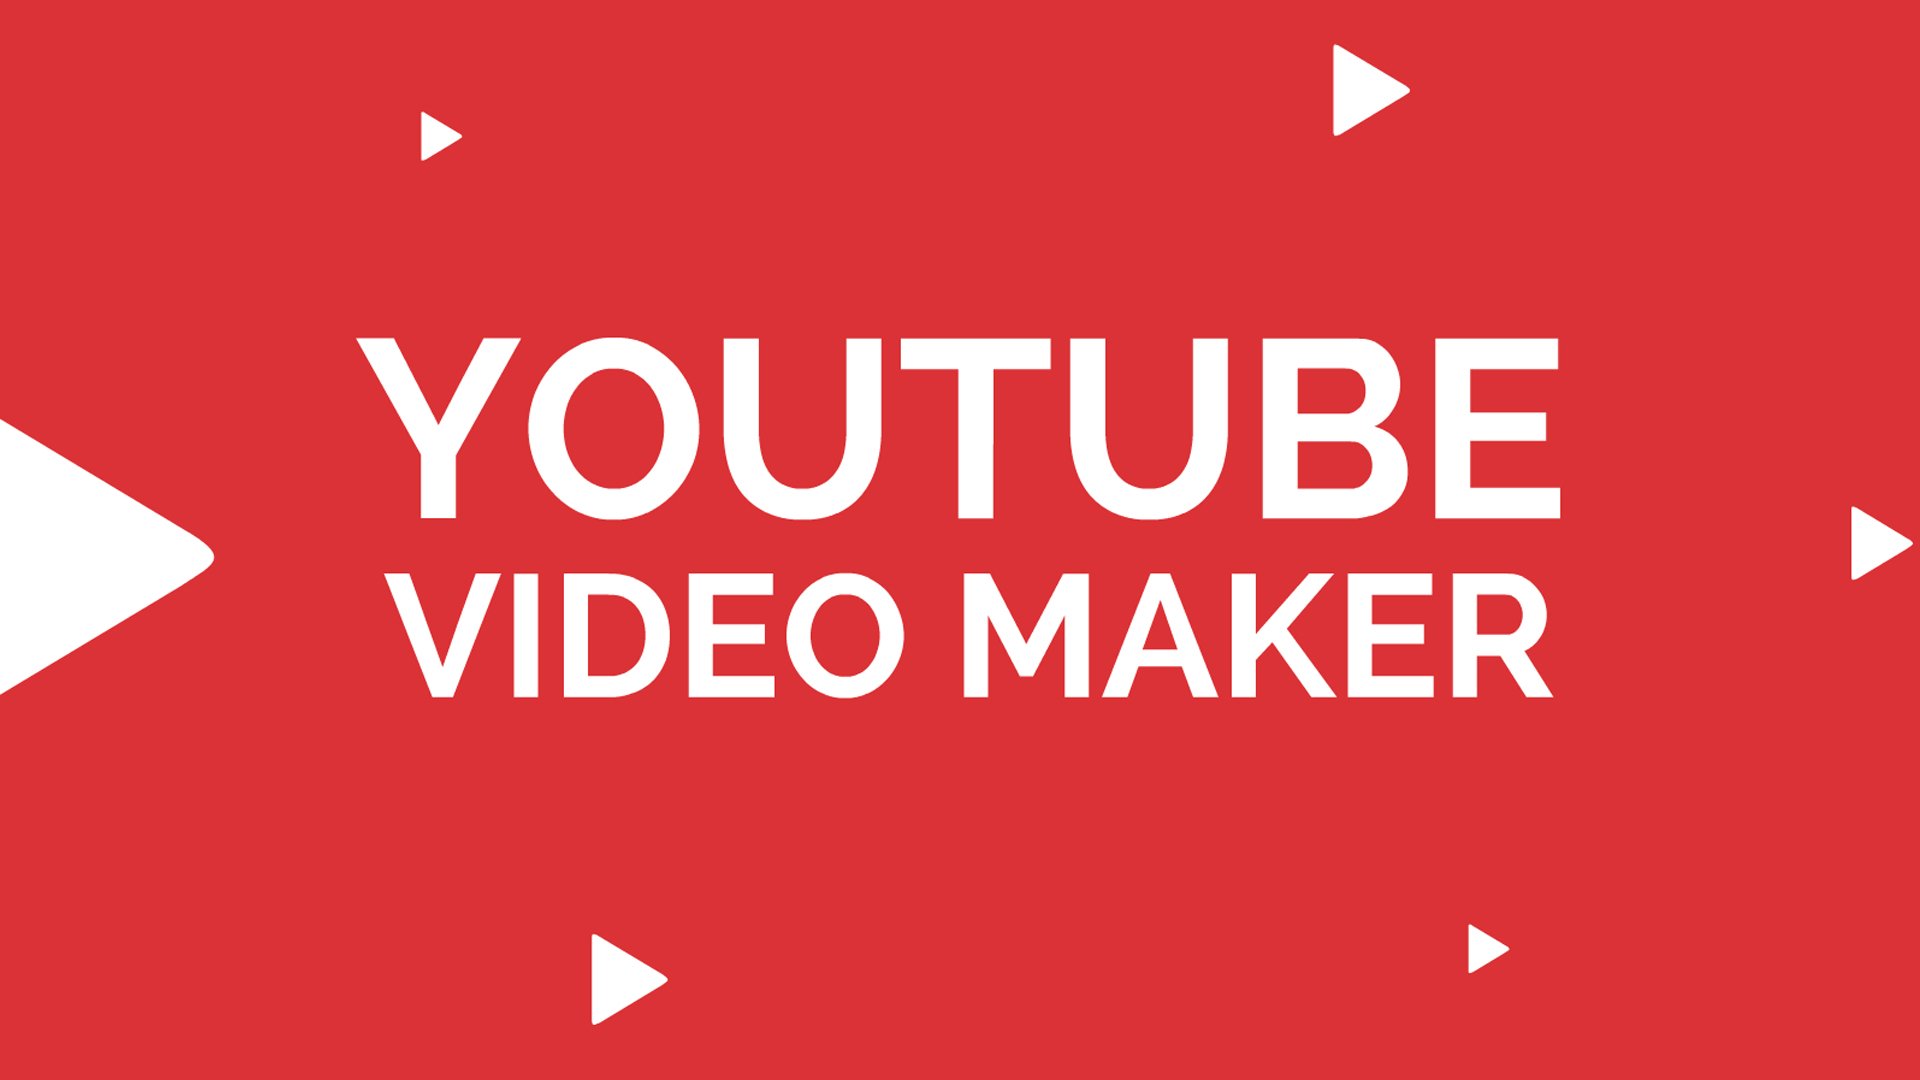 Animated video maker free download